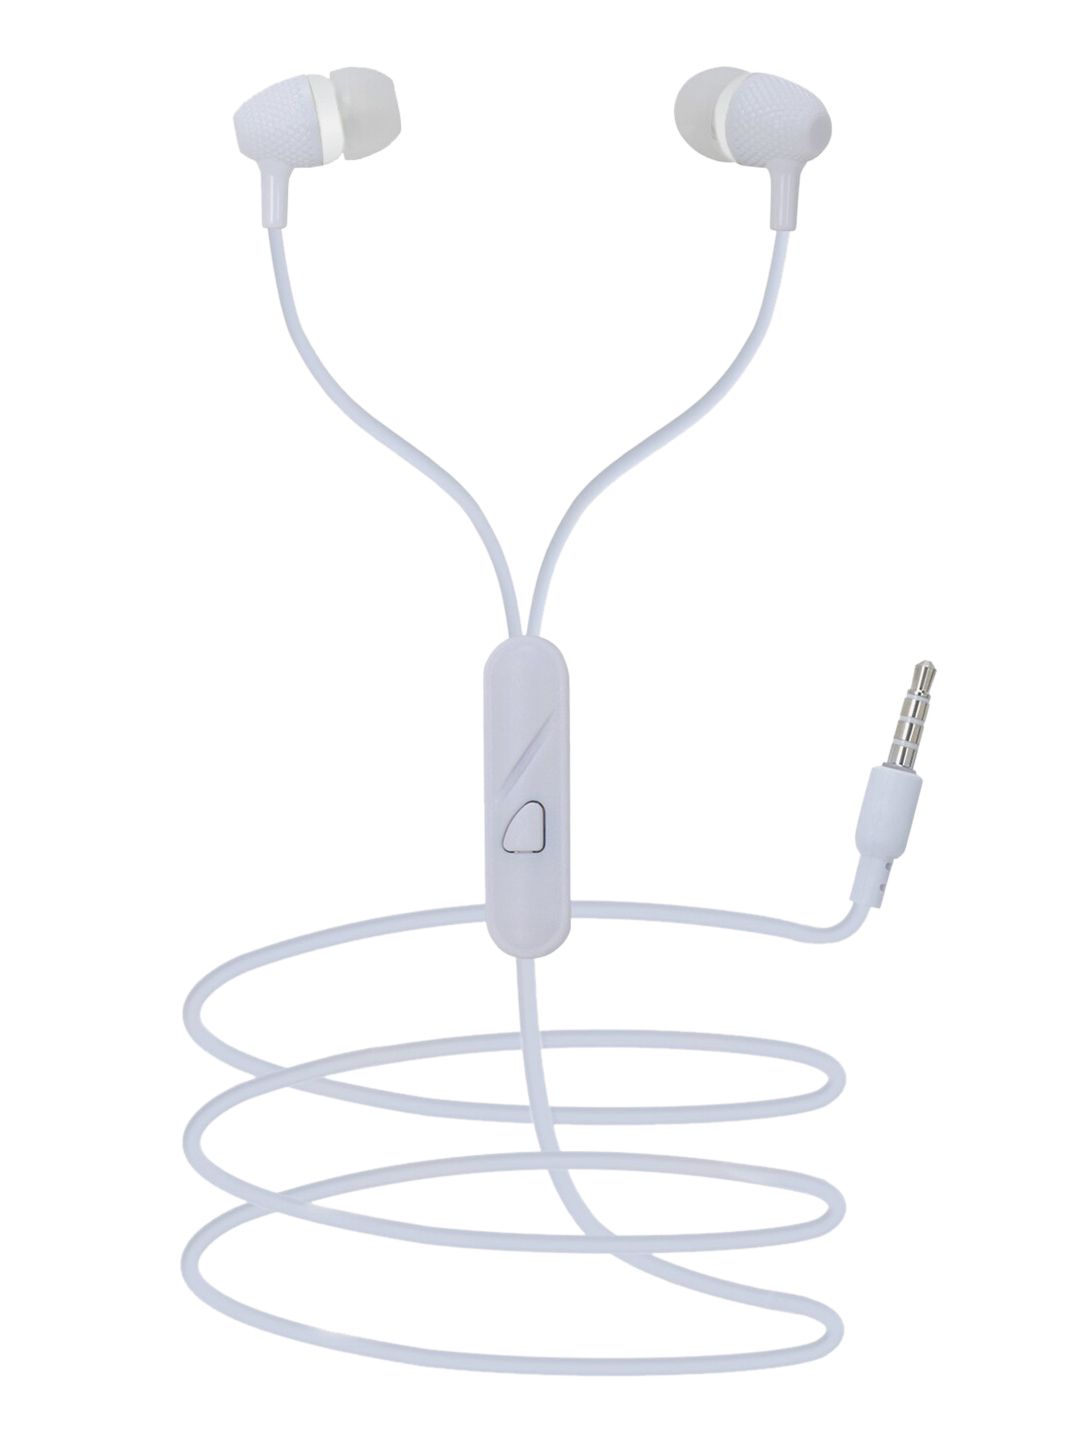 SWAGME White IE009 in-Ear Wired Earphones with Mic Price in India